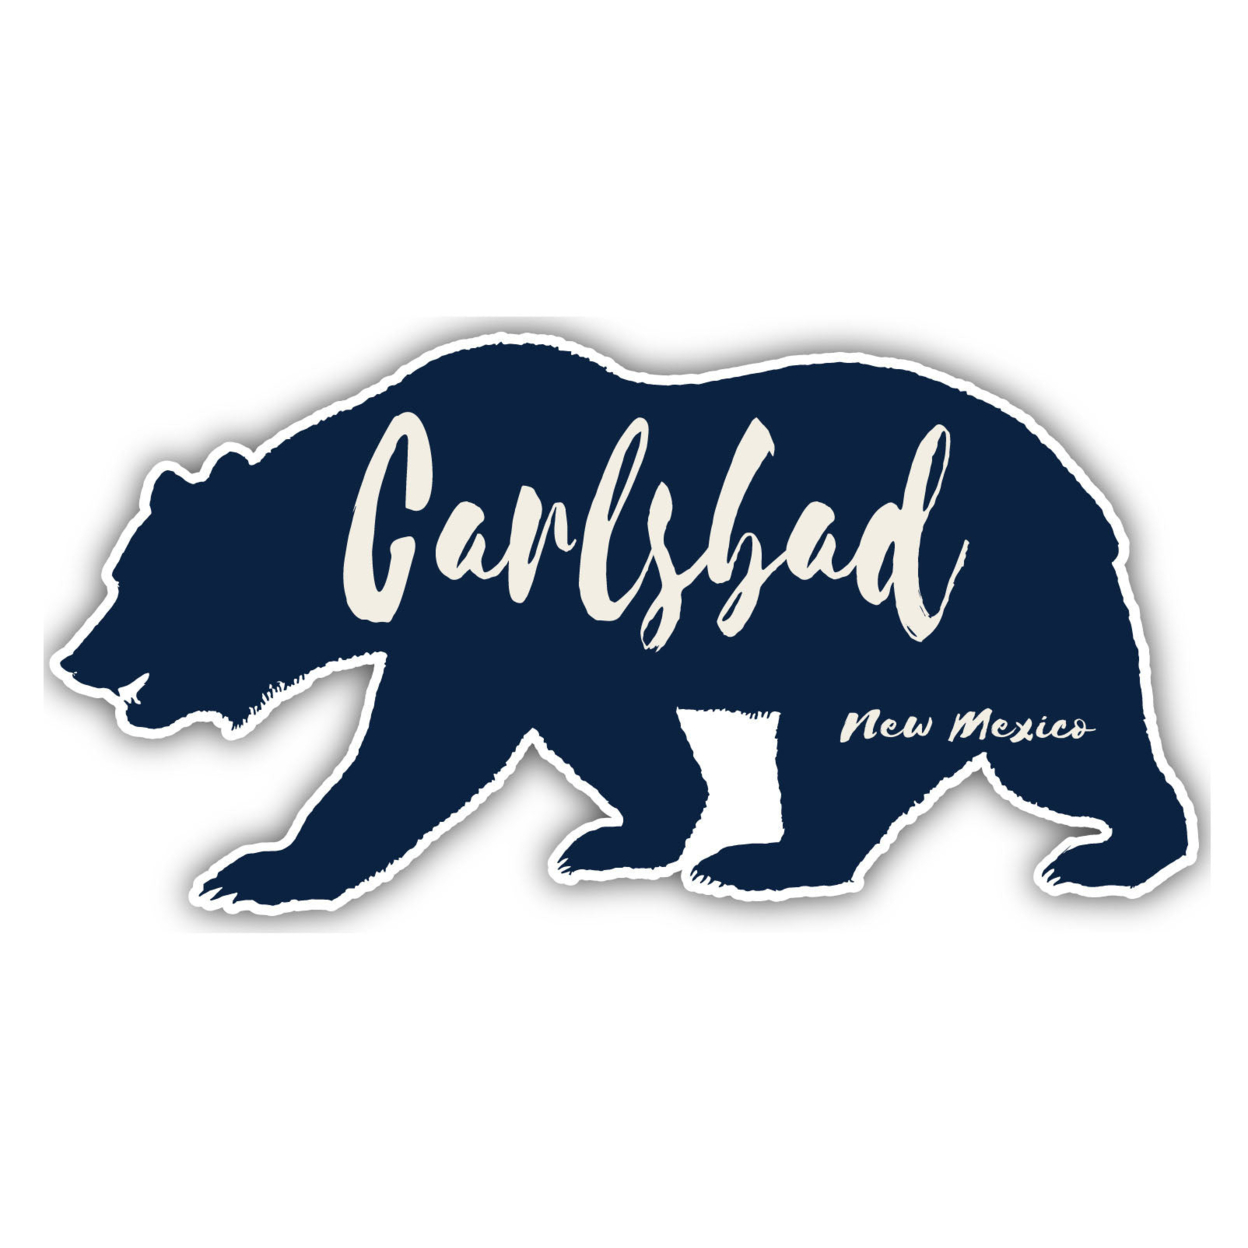 Carlsbad New Mexico Souvenir Decorative Stickers (Choose Theme And Size) - 4-Pack, 4-Inch, Bear